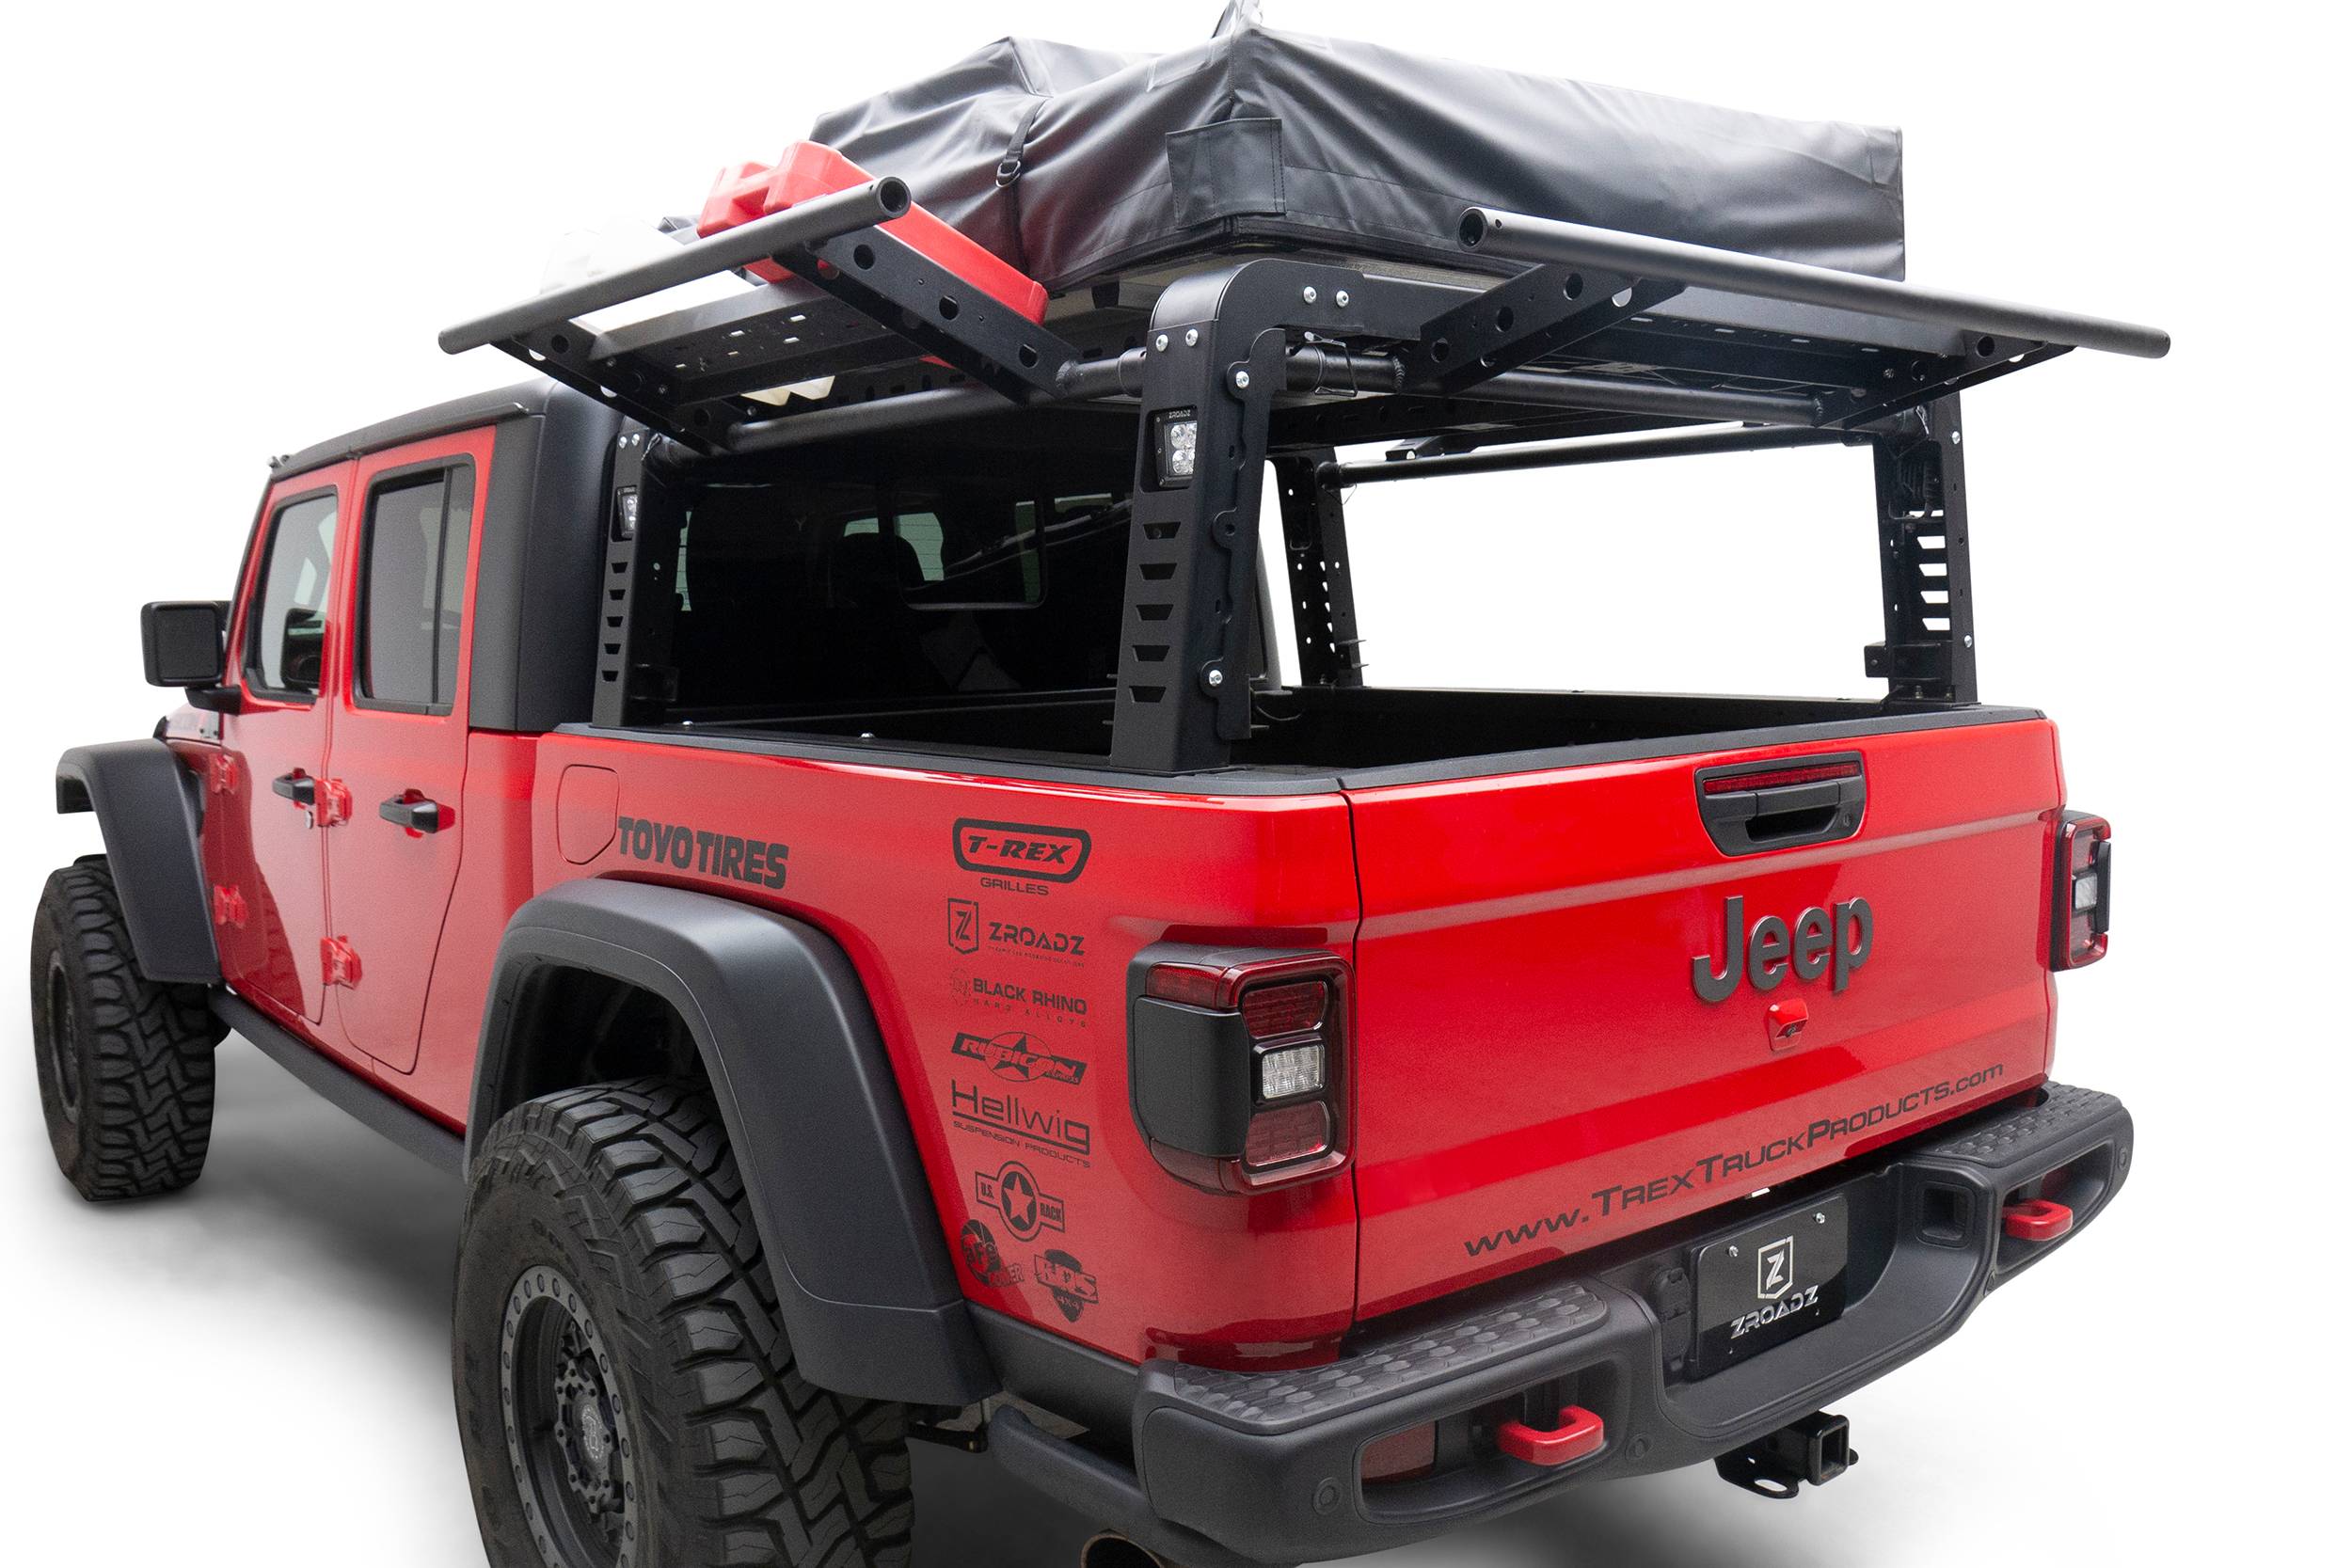 2019-2021 Jeep Gladiator Access Overland Rack With Three Lifting Side Gates, For use on Factory Jeep Gladiator Overland Rack With Tonneau Cover